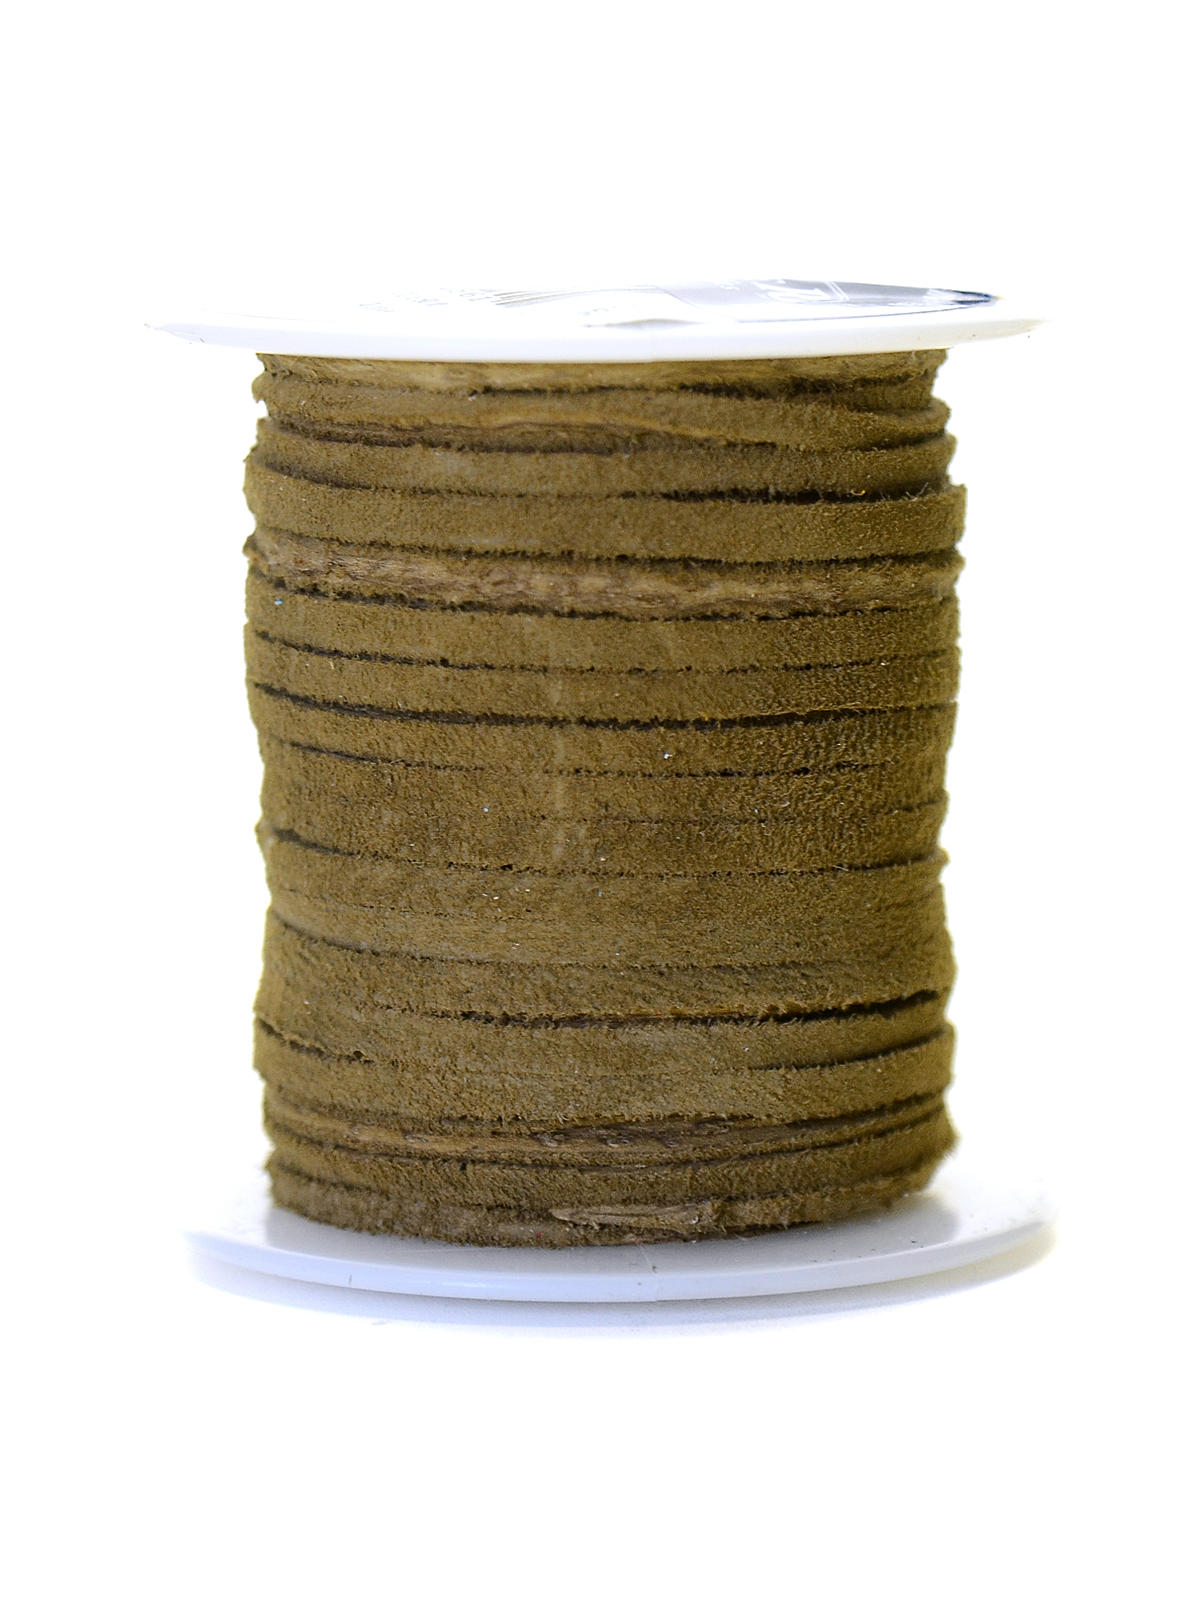 Realeather Sof-suede Lace Spool 3 32 In. X 50 Ft. Tobacco